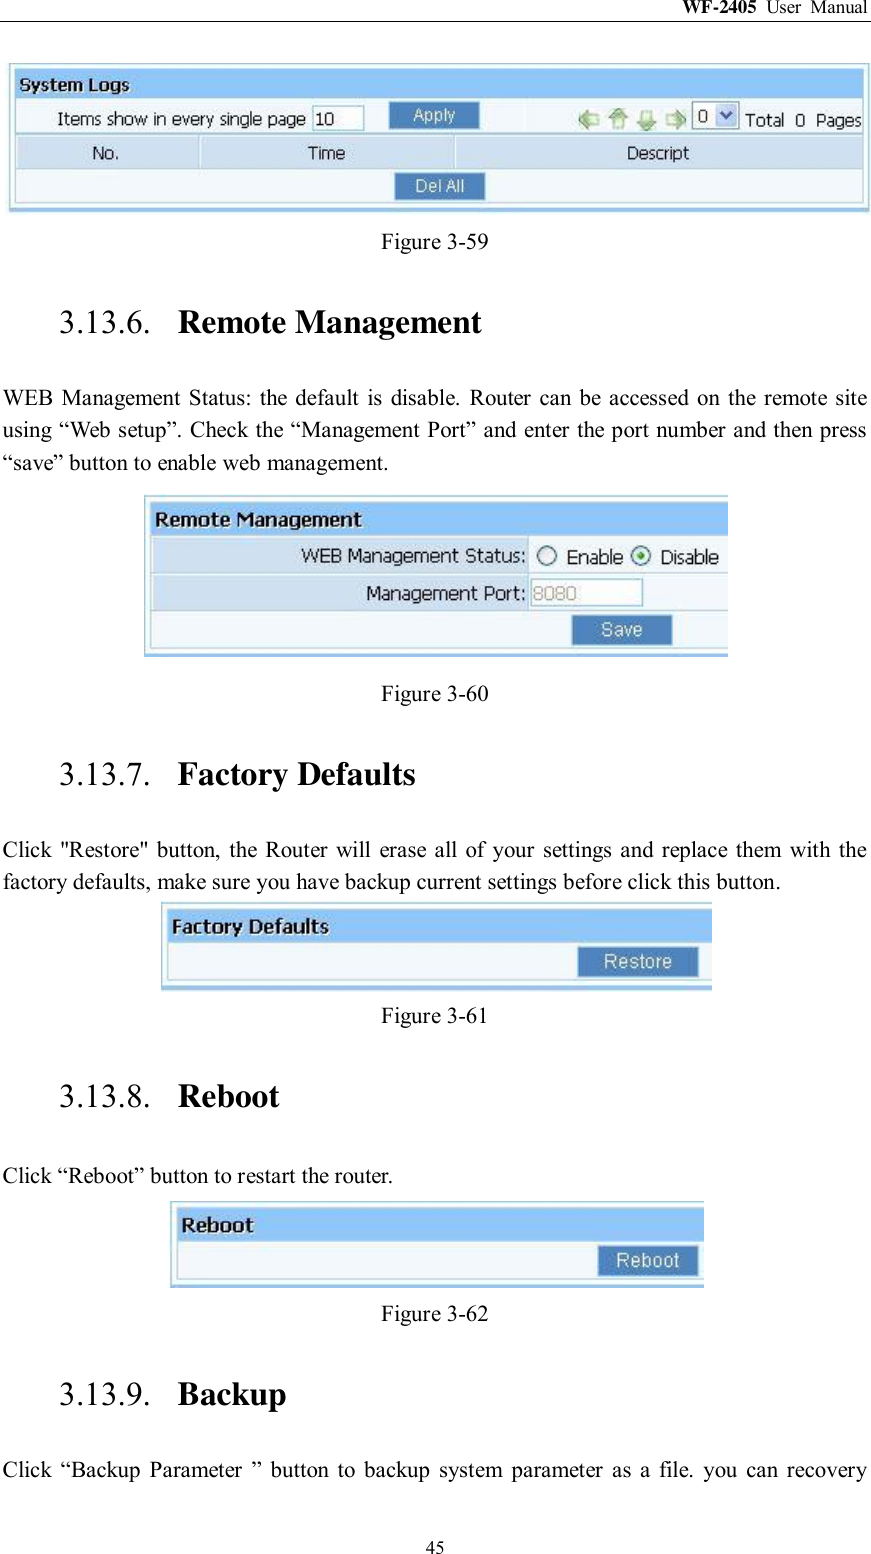 WF-2405  User  Manual  45  Figure 3-59 3.13.6. Remote Management WEB  Management Status:  the  default  is disable.  Router  can be accessed  on  the remote site using “Web setup”. Check the “Management Port” and enter the port number and then press “save” button to enable web management.  Figure 3-60 3.13.7. Factory Defaults Click &quot;Restore&quot;  button,  the  Router  will  erase  all of  your  settings and  replace them  with the factory defaults, make sure you have backup current settings before click this button.  Figure 3-61 3.13.8. Reboot Click “Reboot” button to restart the router.  Figure 3-62 3.13.9. Backup Click  “Backup  Parameter  ”  button  to  backup  system  parameter  as  a  file.  you  can  recovery 